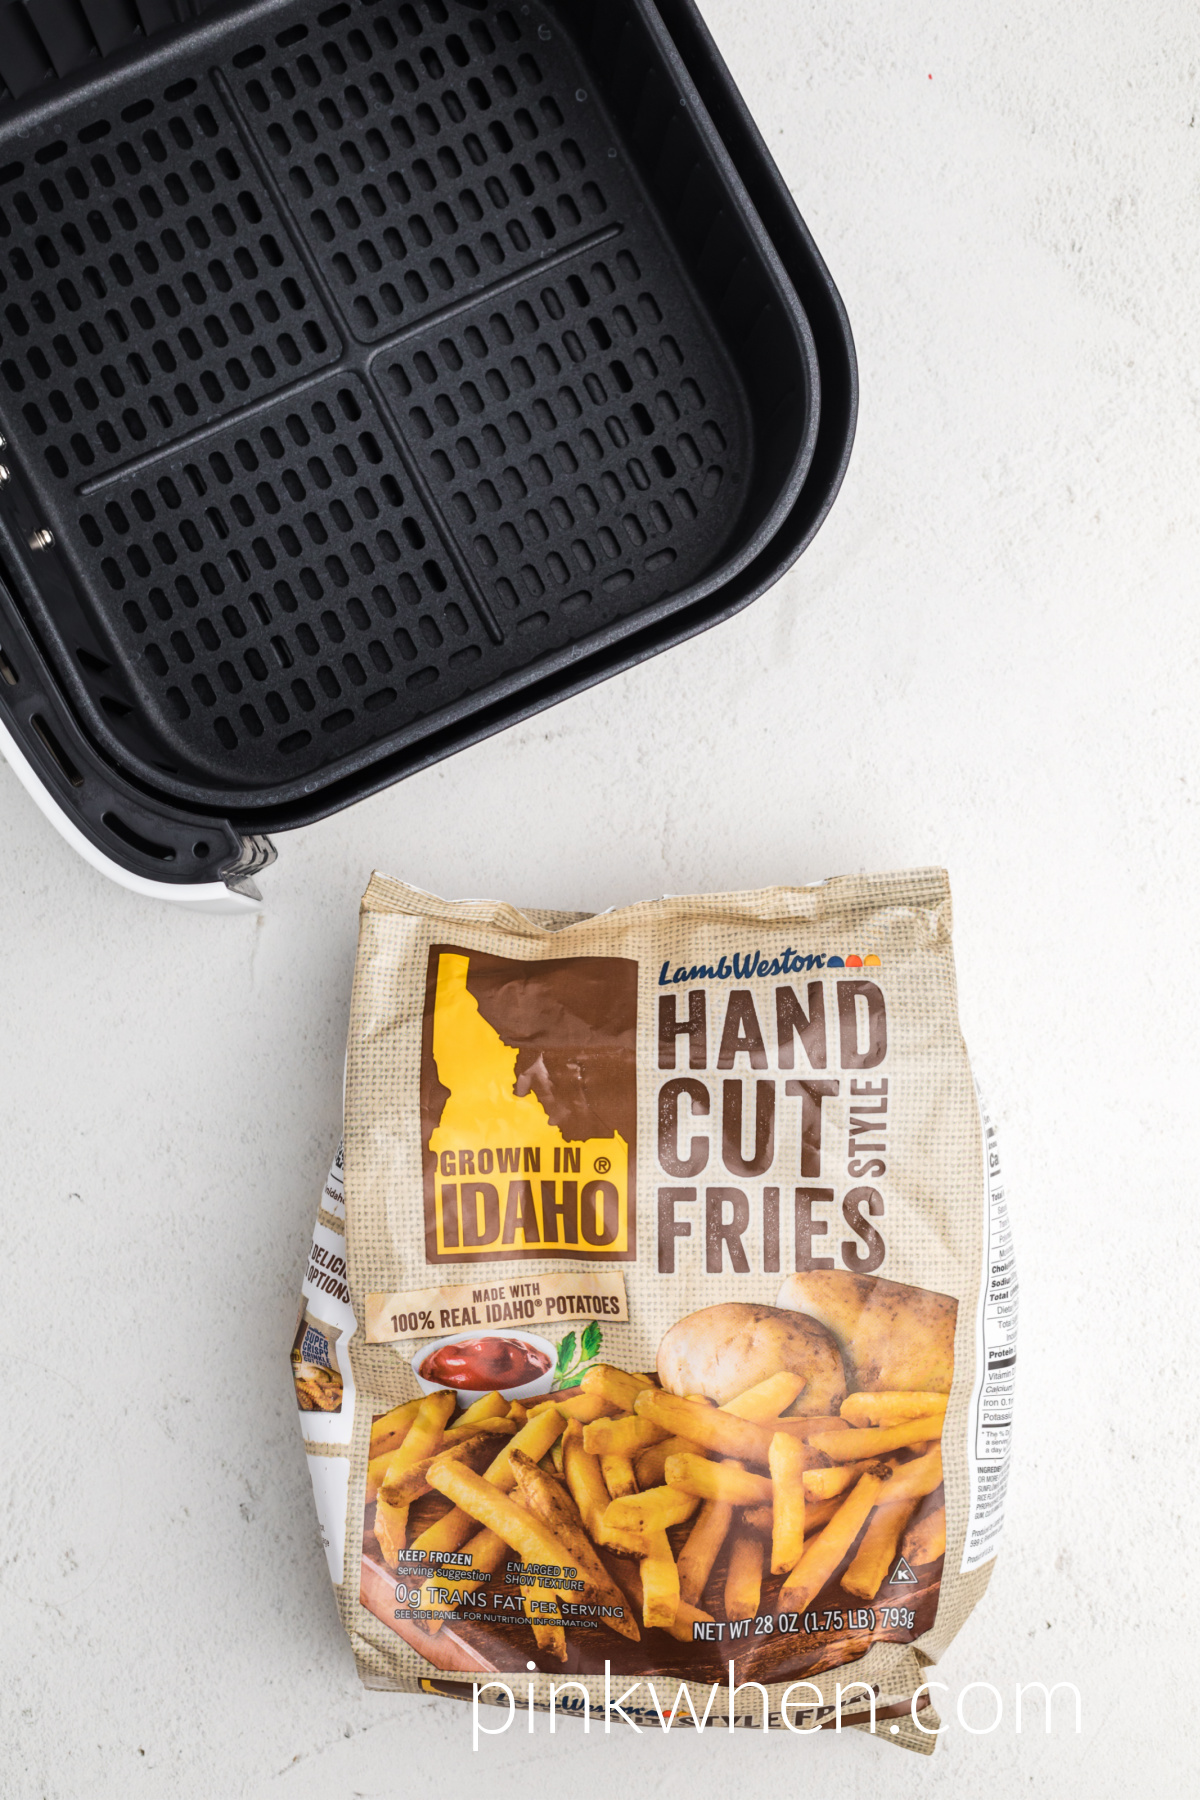 Frozen french fries in a bag ready to be placed into the basket of the air fryer.